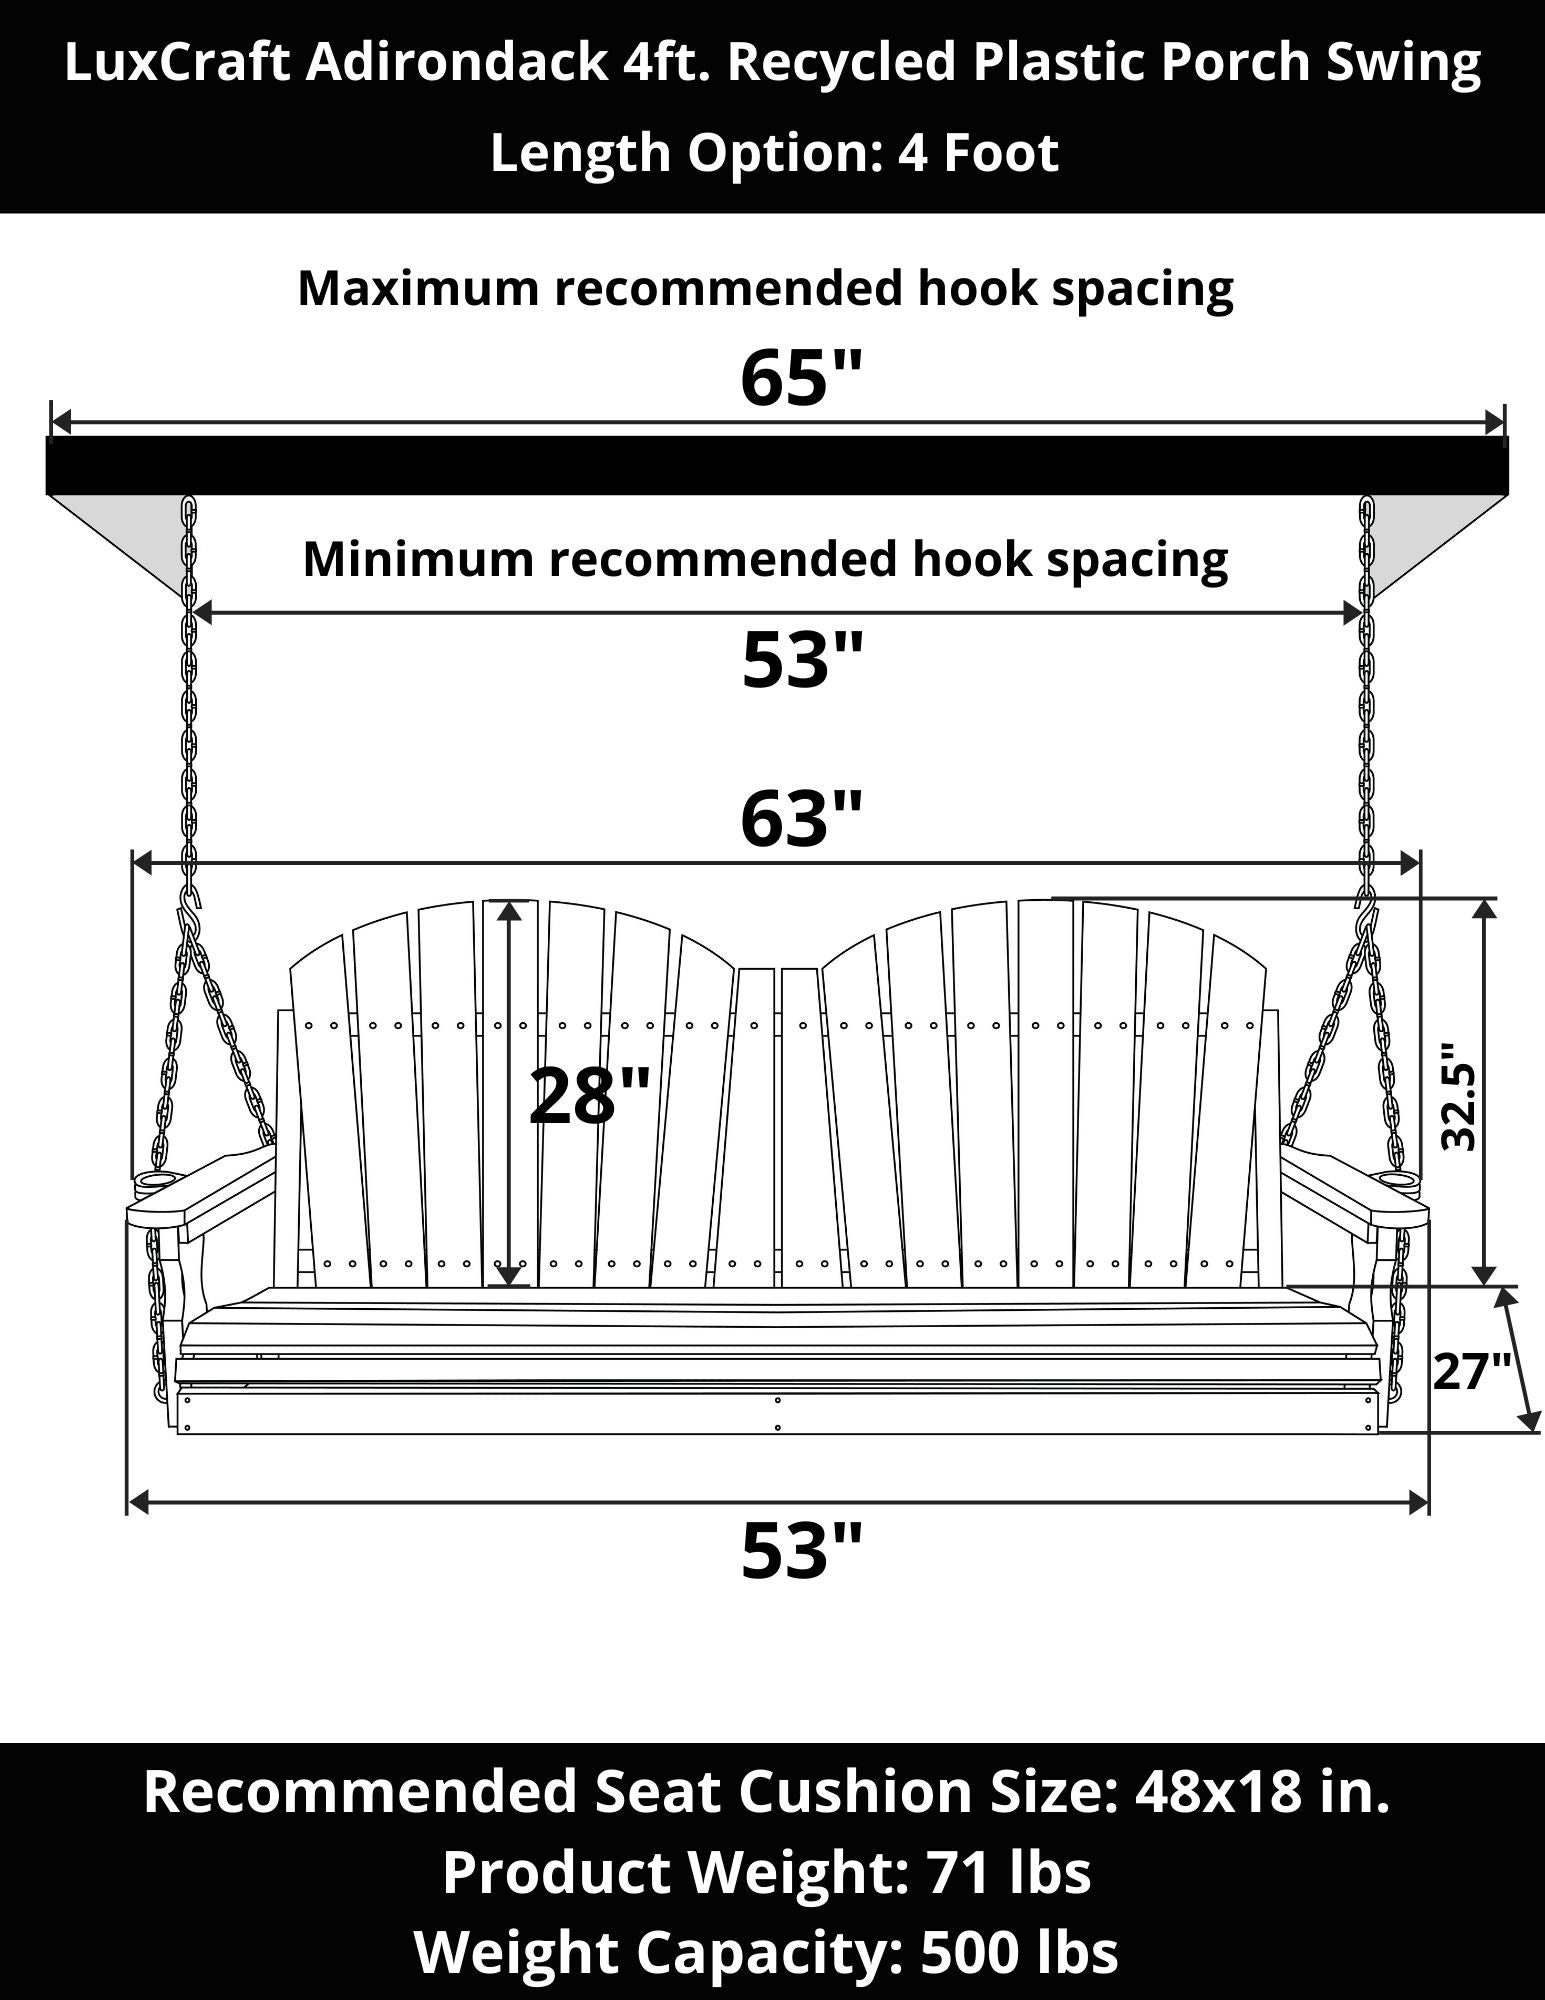 LuxCraft Adirondack 4ft. Recycled Plastic Porch Swing